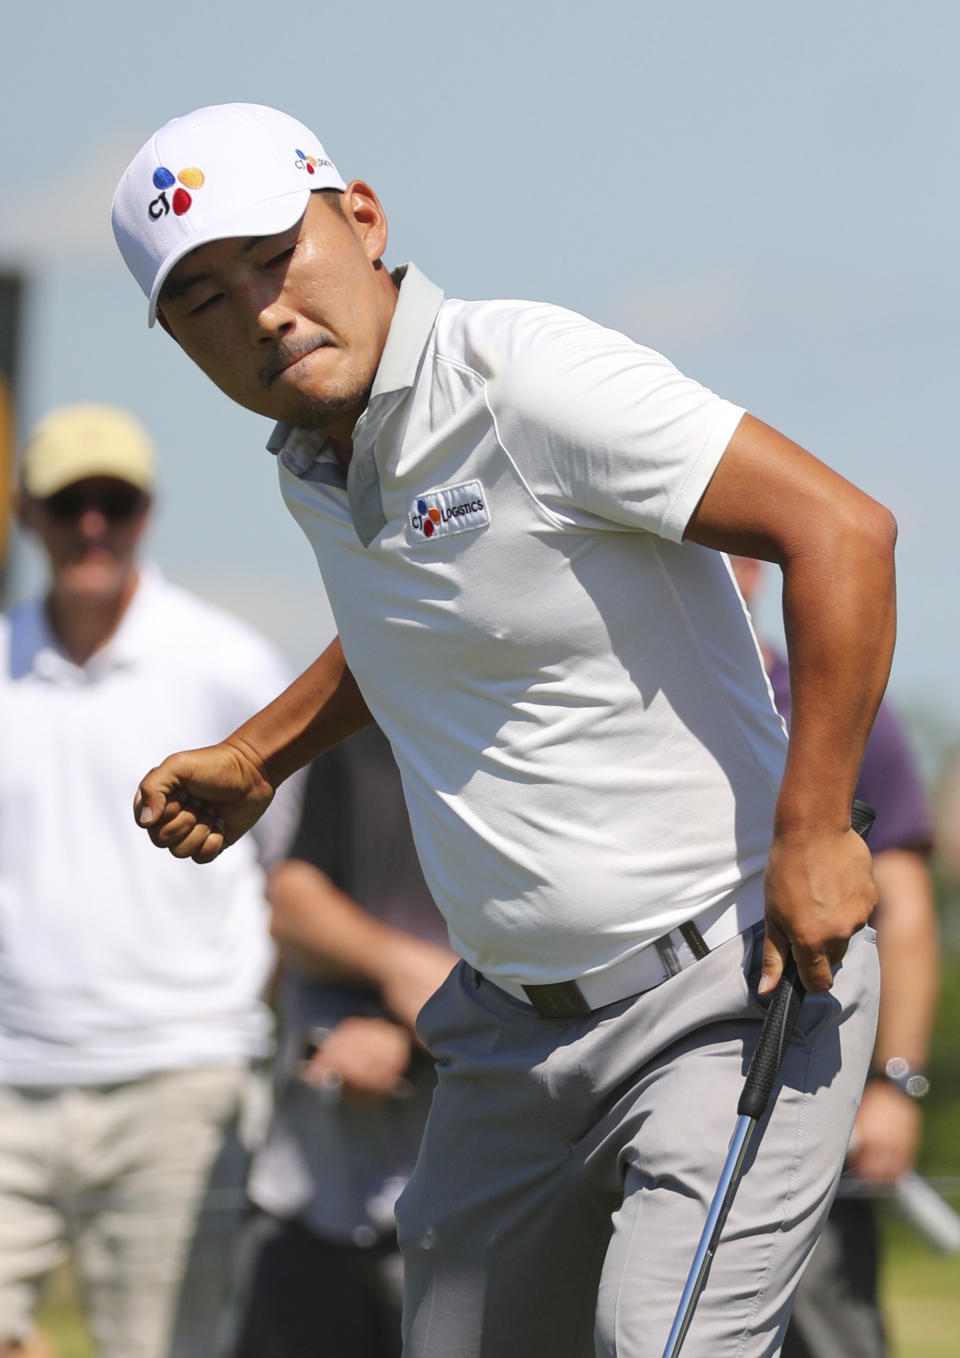 Sung Kang pumps his fist after a birdie putt on the 10th hole in the final round of the Byron Nelson golf tournament on Sunday, May 12, 2019, in Dallas. (AP Photo/Richard W. Rodriguez)